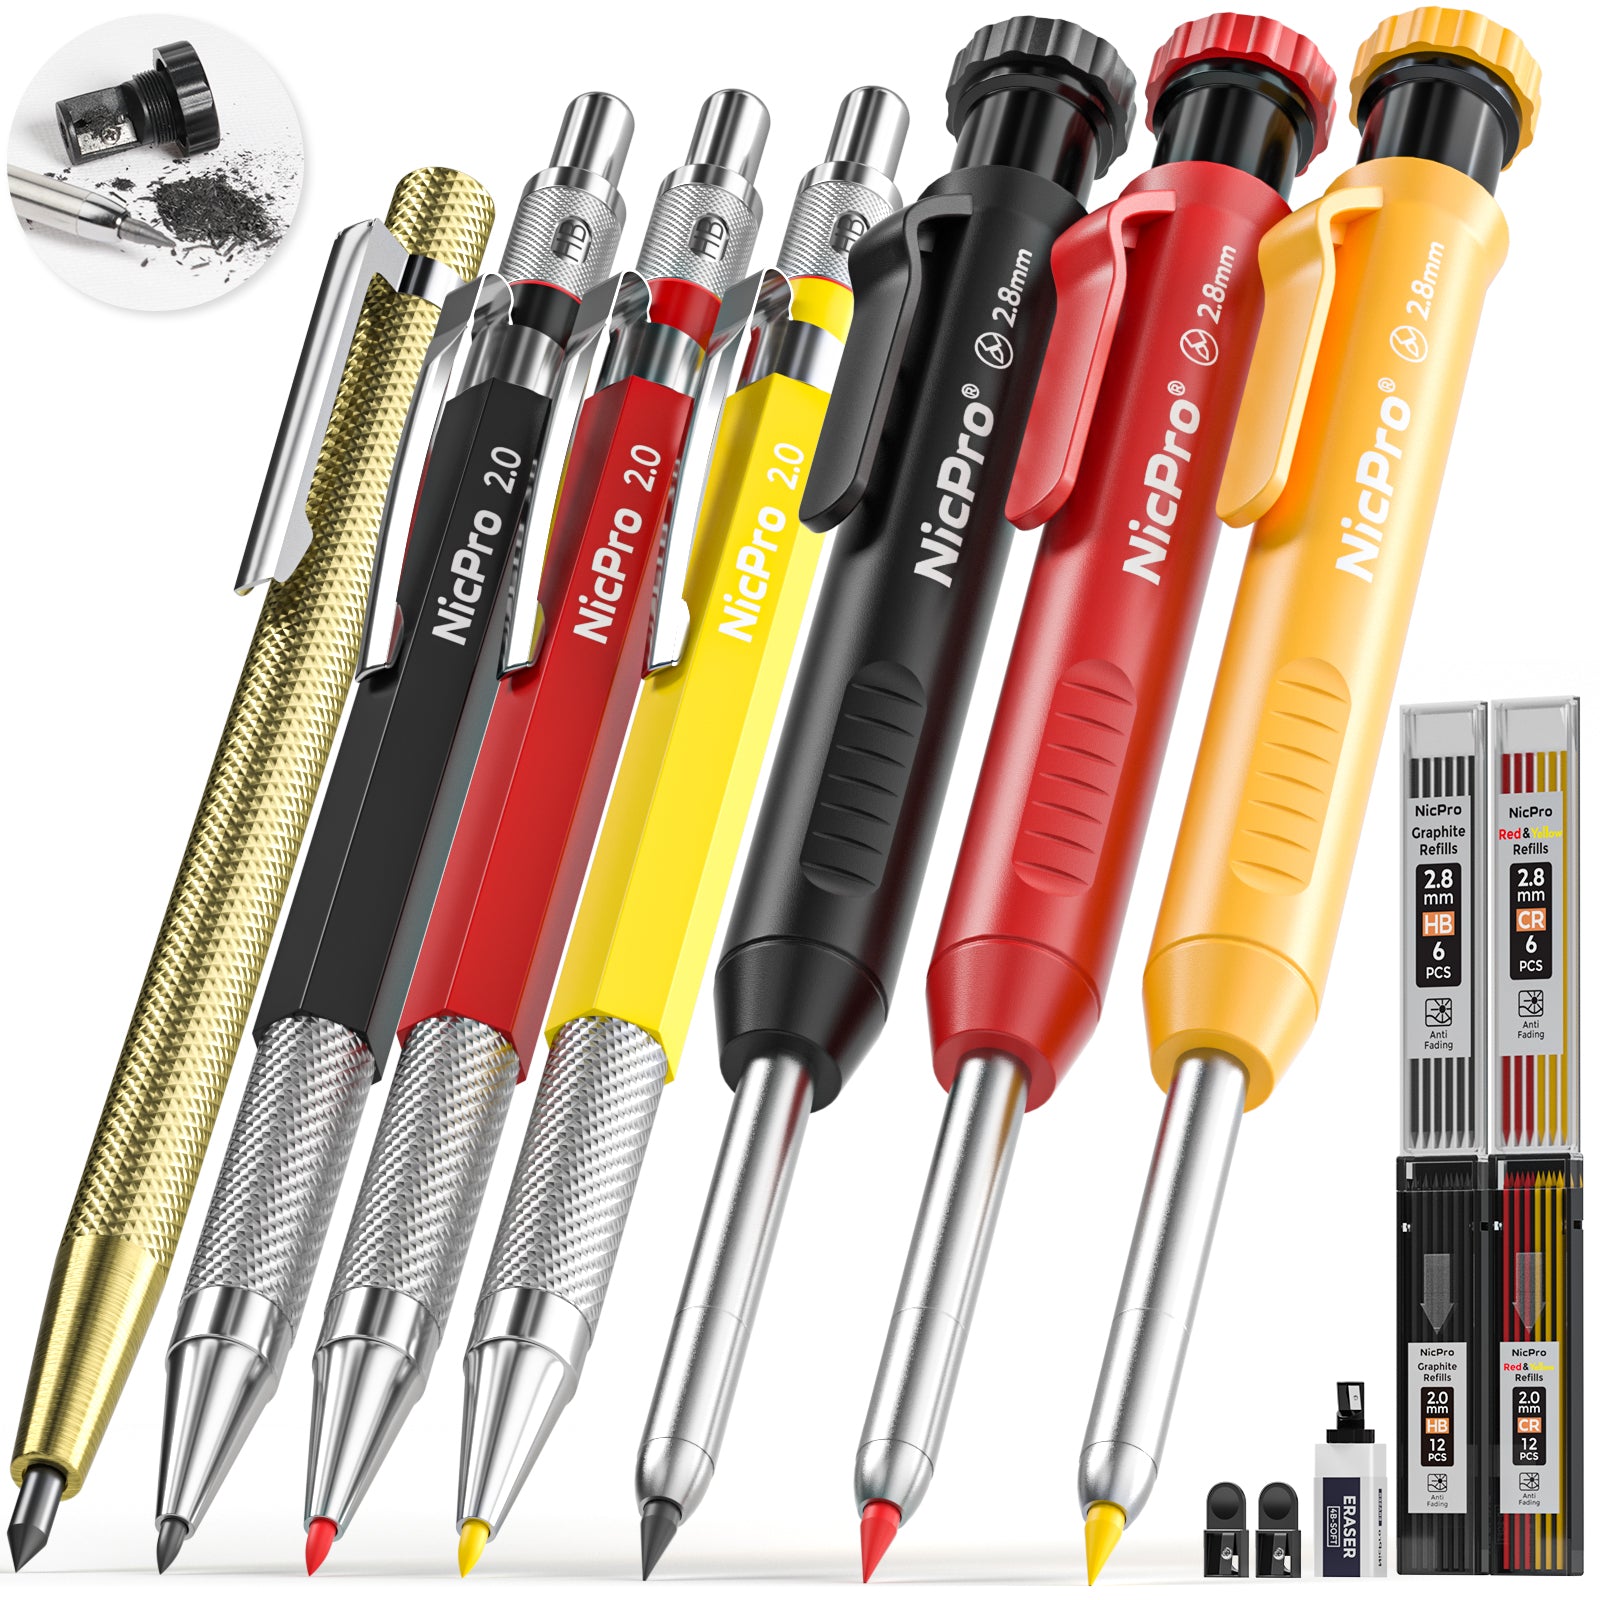 Nicpro 15 Pack Mechanical Carpenter Pencil Set with 42 Refills & Carbide Scribe Tool, Deep Hole Marker Construction Pencils Heavy Duty Woodworking Pencils Built-in Sharpener for Construction Architect